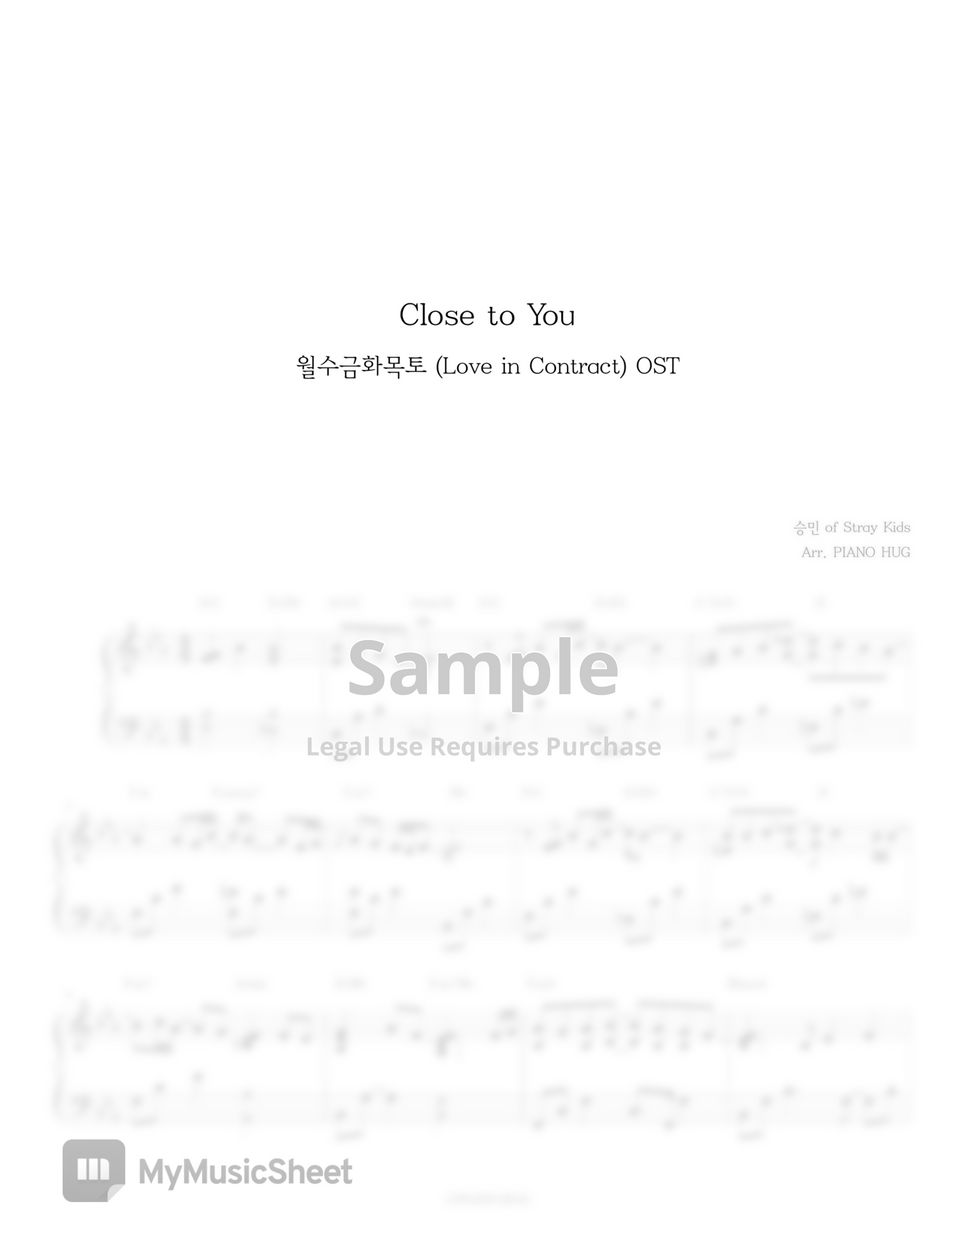 Love in Contract (월수금화목토) OST - Seungmin of Stray Kids - Close to You by Piano Hug